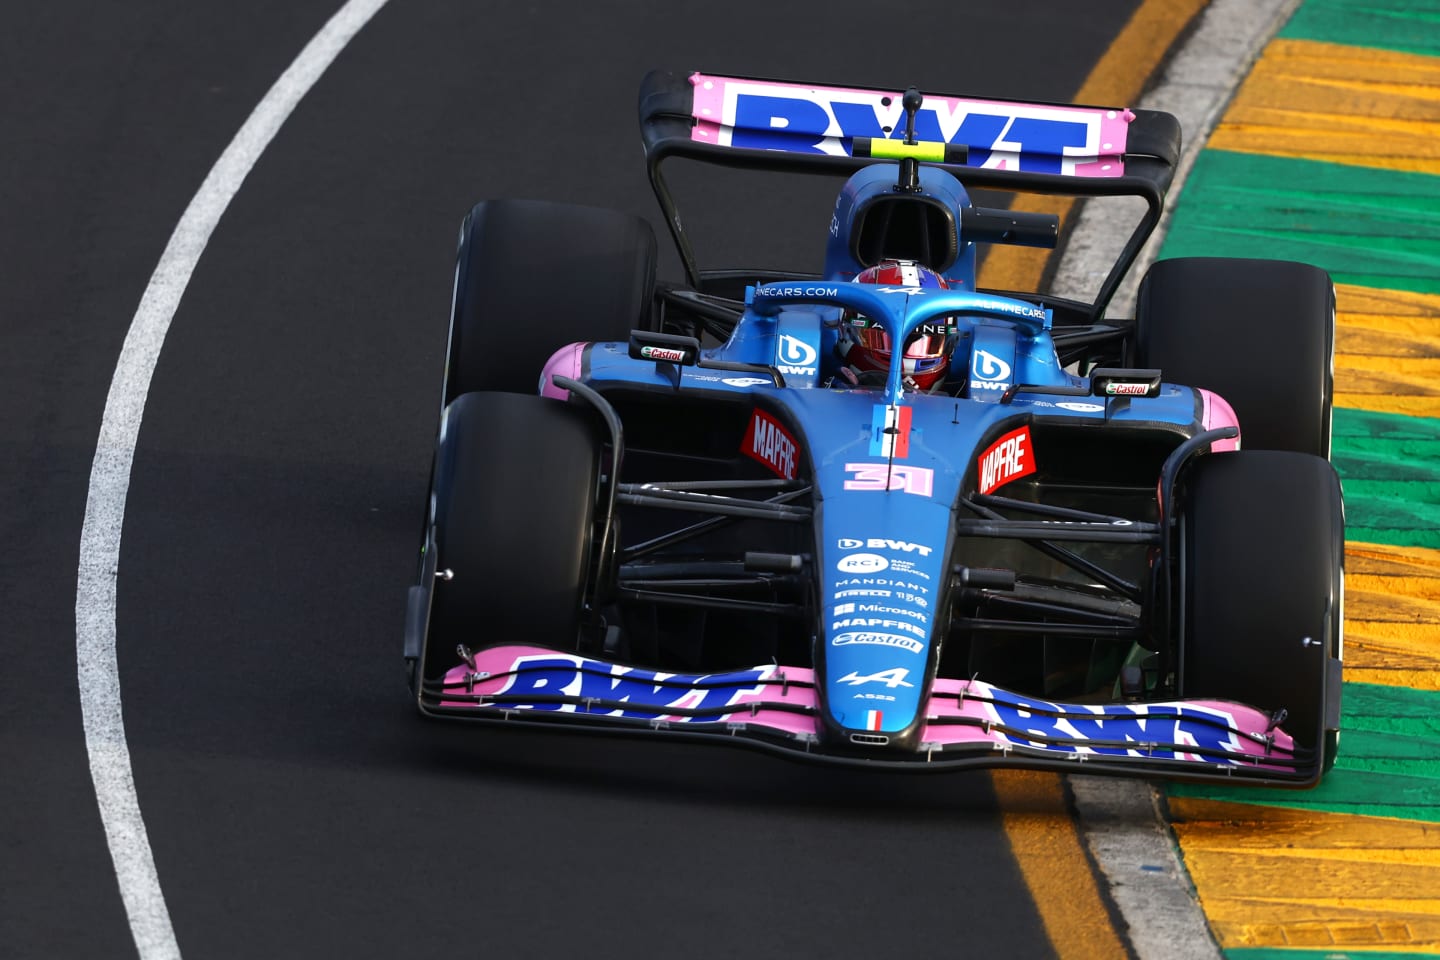 MELBOURNE, AUSTRALIA - APRIL 08: Esteban Ocon of France driving the (31) Alpine F1 A522 Renault on track during practice ahead of the F1 Grand Prix of Australia at Melbourne Grand Prix Circuit on April 08, 2022 in Melbourne, Australia. (Photo by Bryn Lennon - Formula 1/Formula 1 via Getty Images)